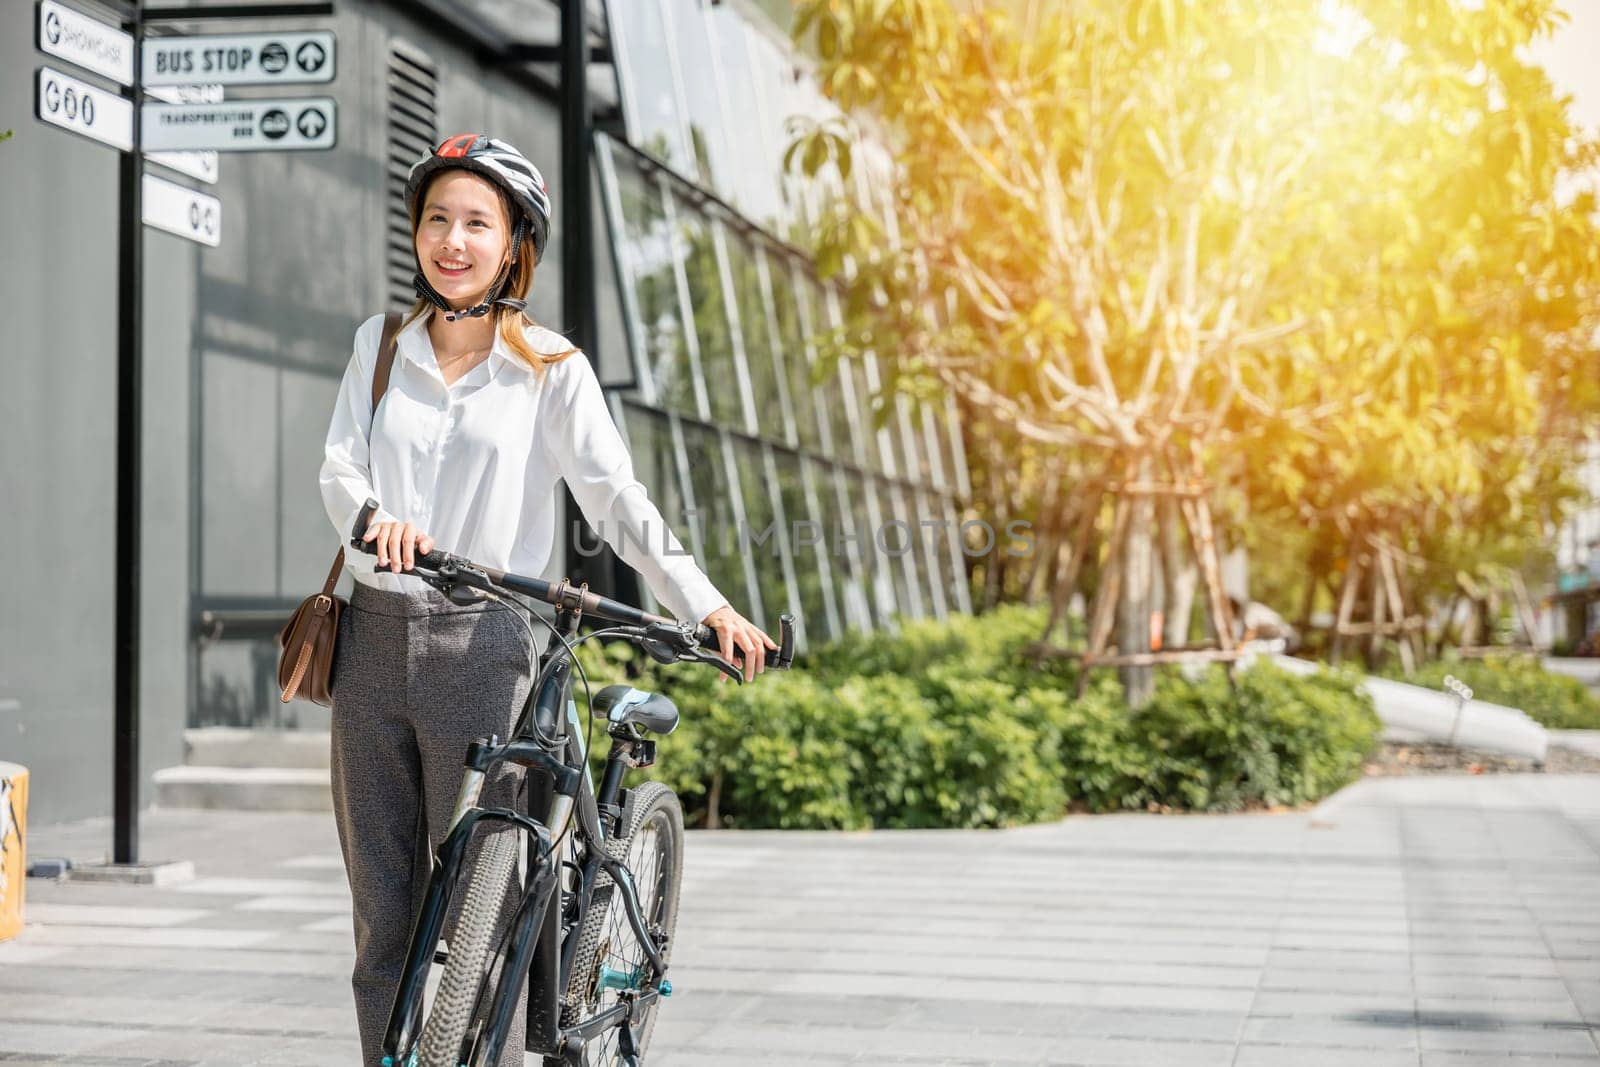 A cheerful Asian businesswoman helmeted and in suit stands with her bicycle symbolizing the modern concept of a joyful business commuter. This image showcases the harmony between work and outdoor fun.